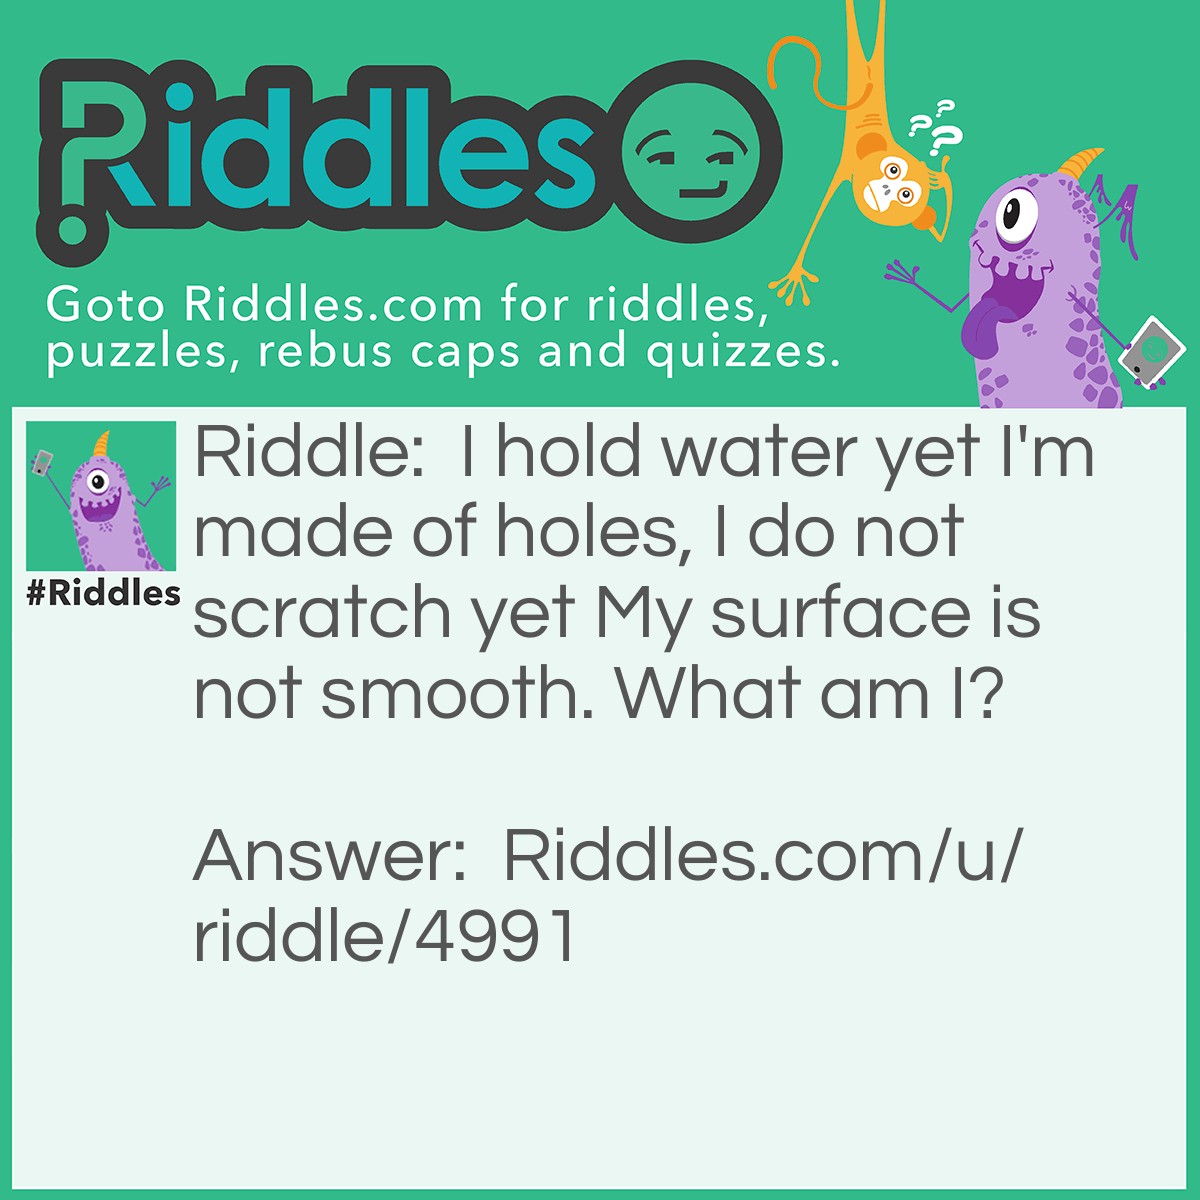 Riddle: I hold water yet I'm made of holes, I do not scratch yet My surface is not smooth. What am I? Answer: A sponge.